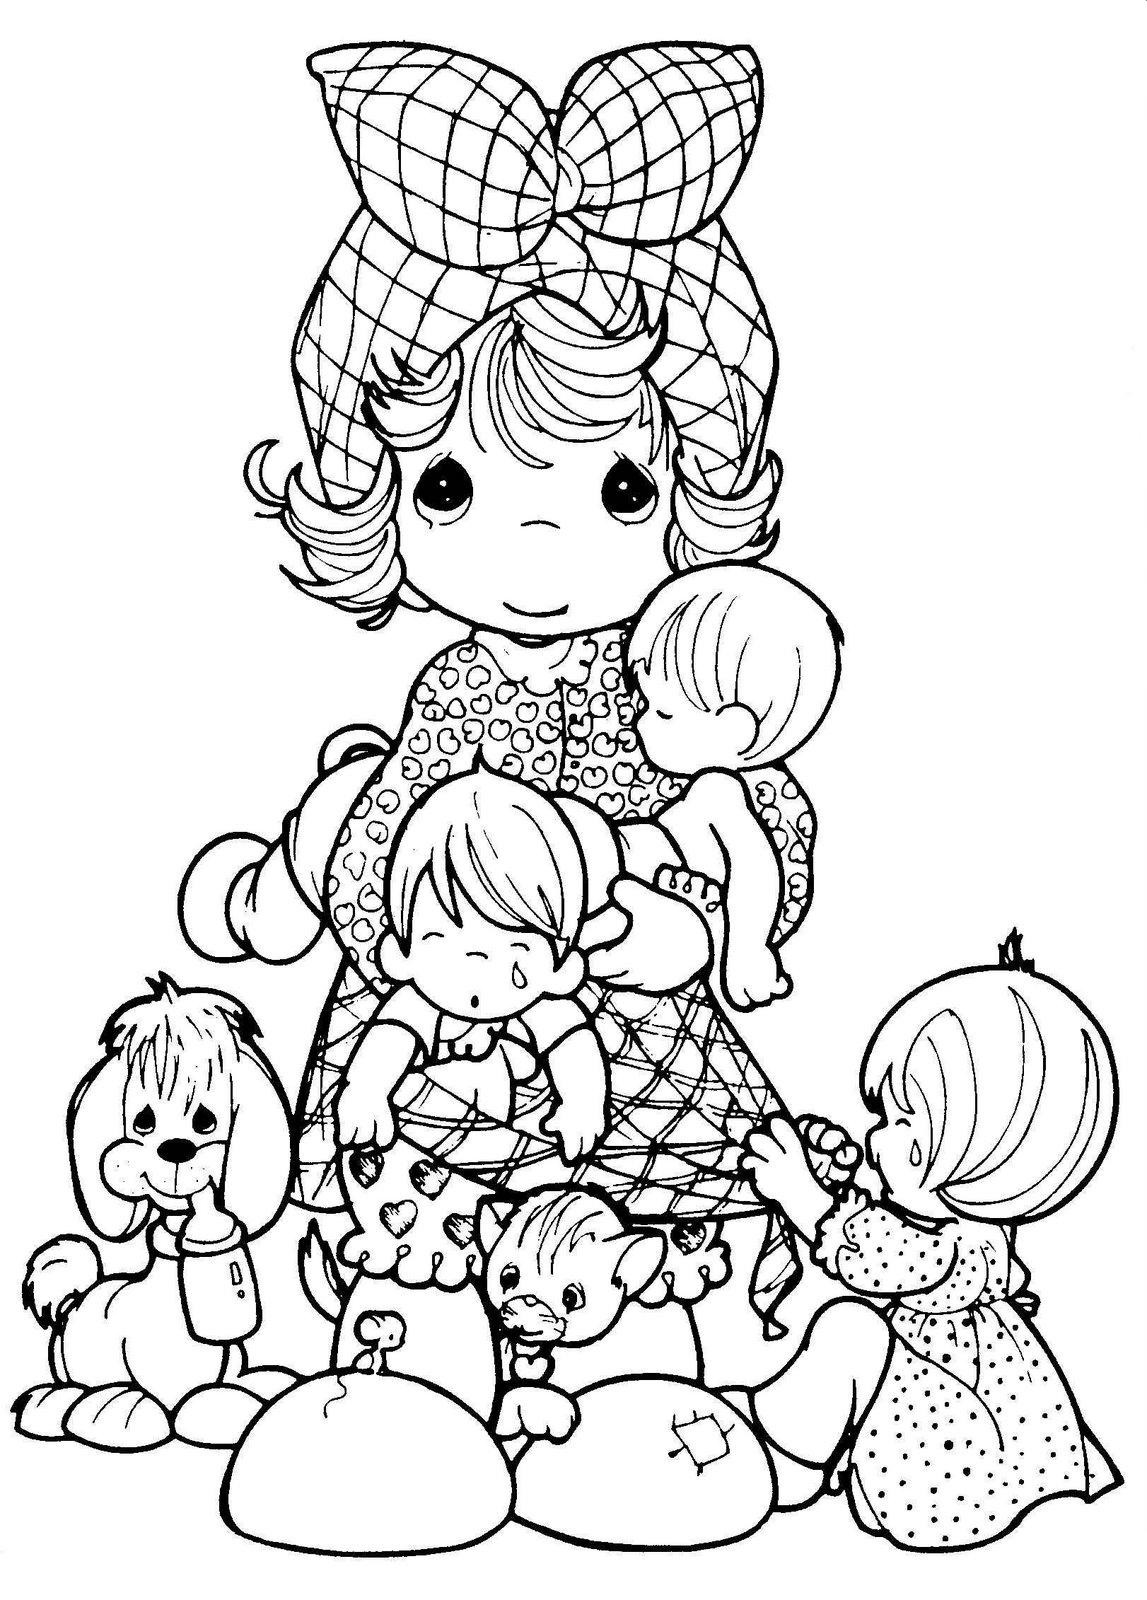 Coloring Pages To Color Online For Free
 Precious Moments Coloring Pages line Free Coloring Home